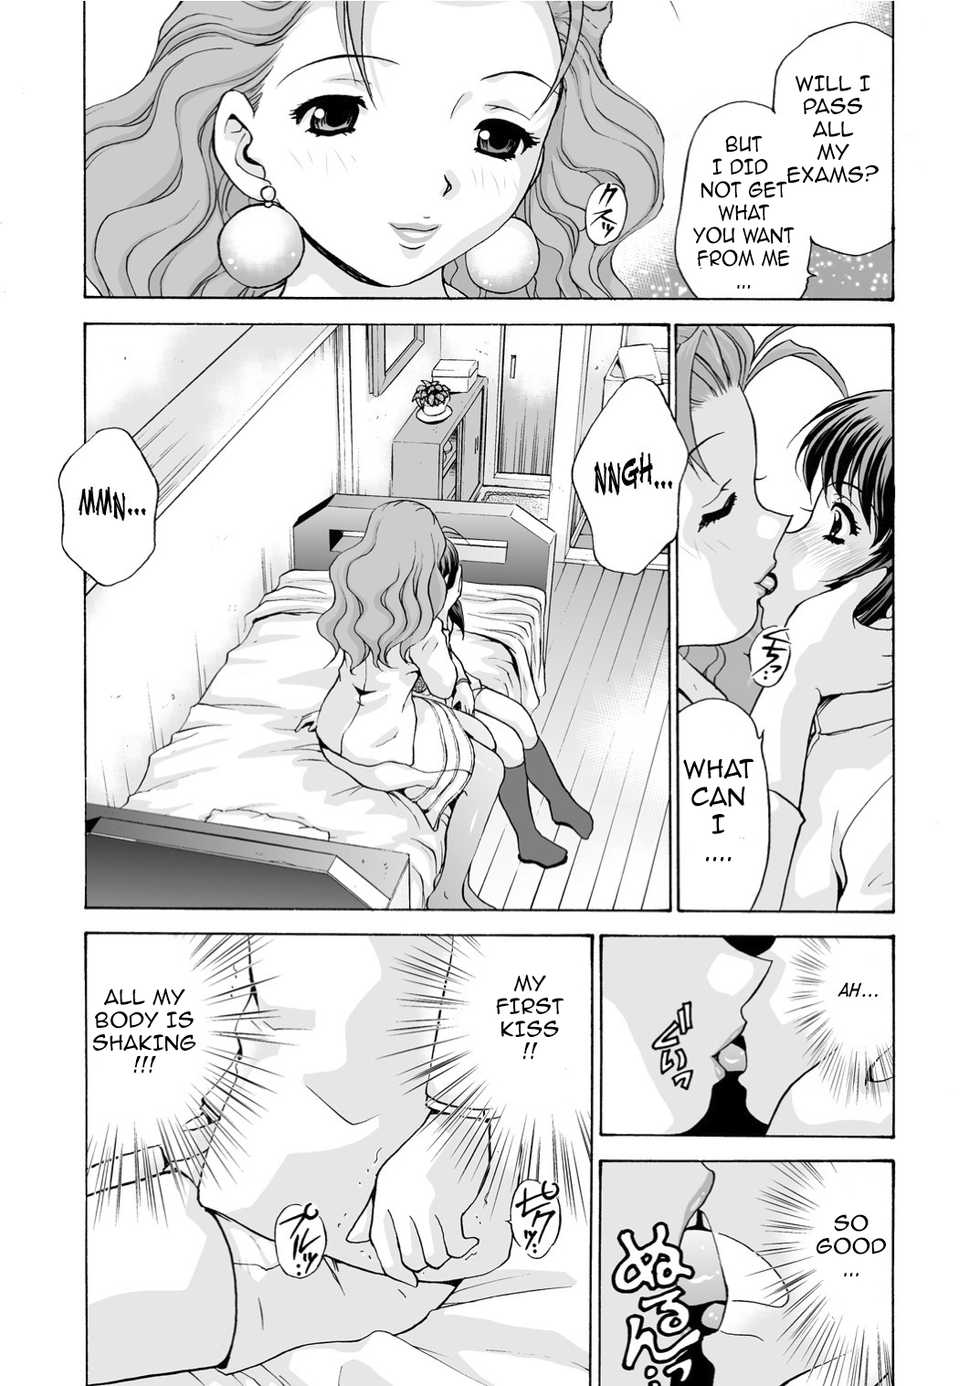 An Injection of Miss Mamiko [English] [Rewrite] [Drages] [Decensored] - Page 11